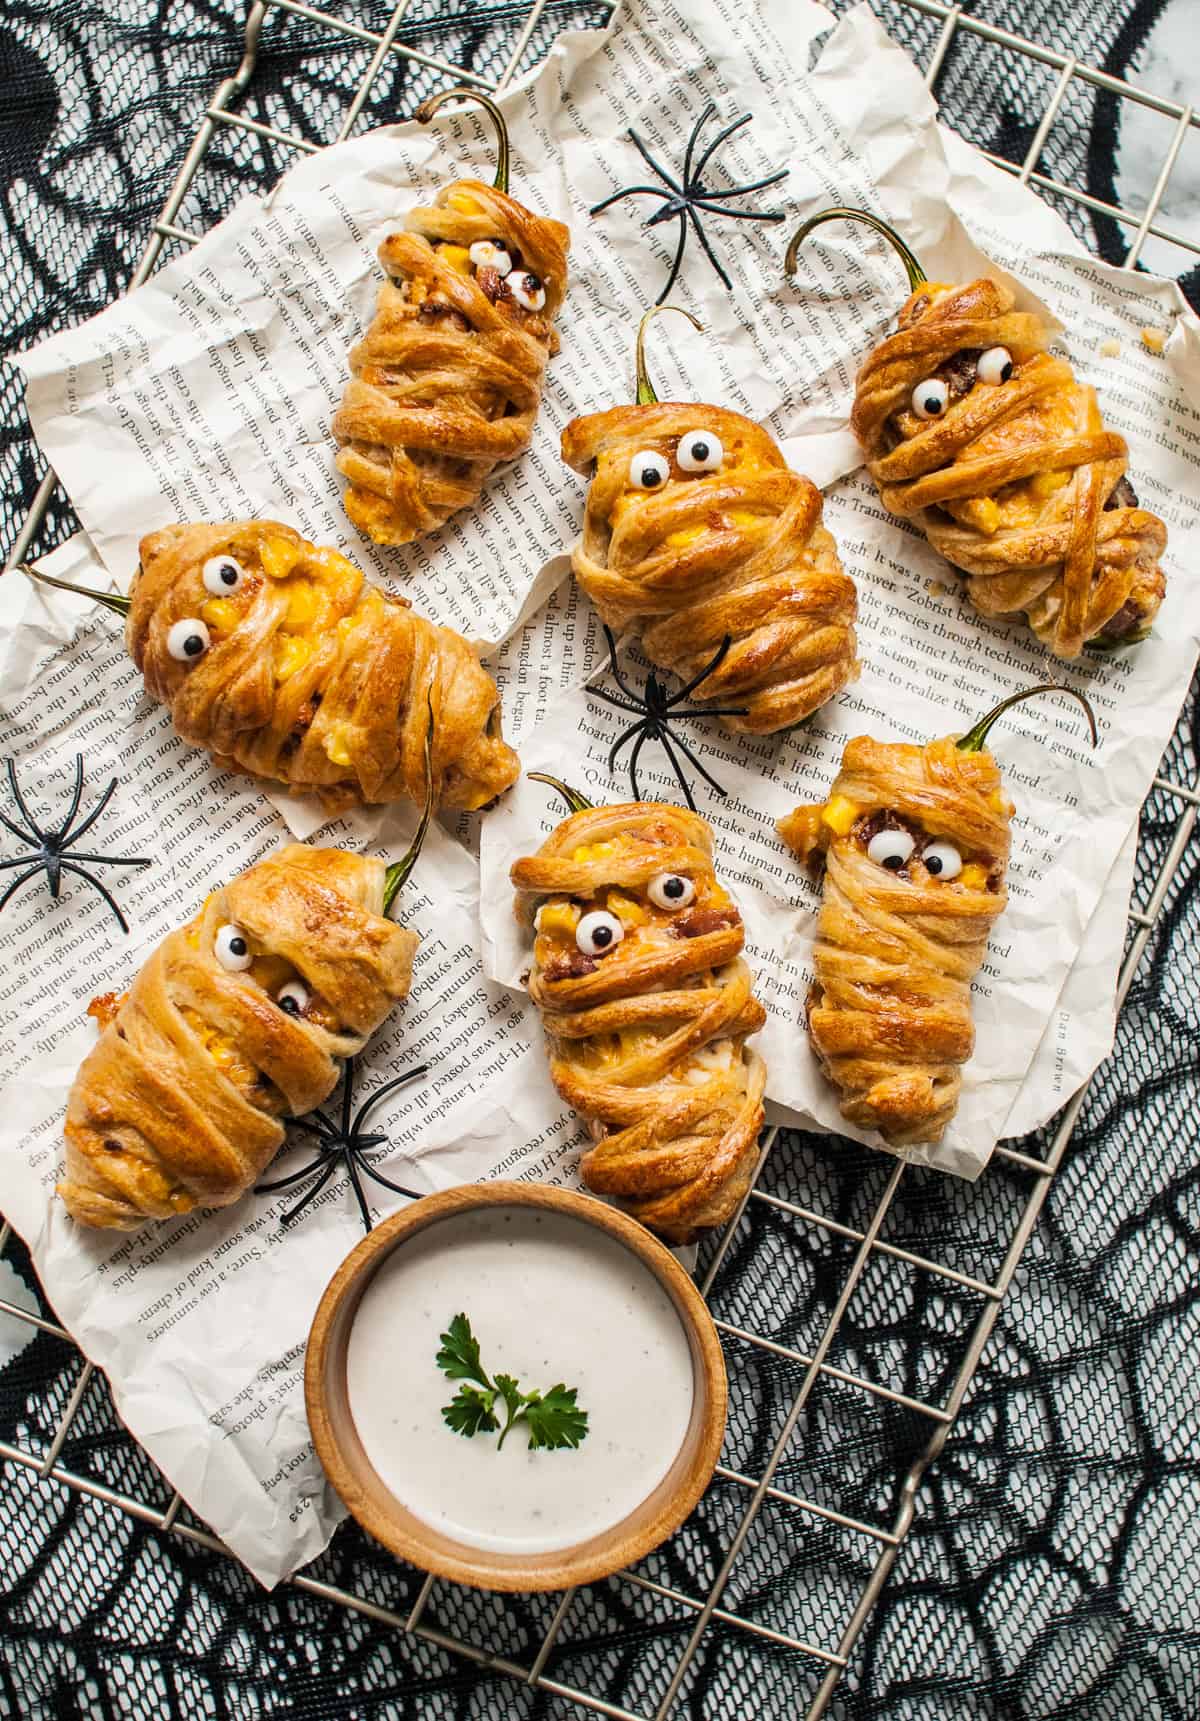 Mummy jalapeno poppers made with candy eyes next to a bowl of ranch sauce for dipping.